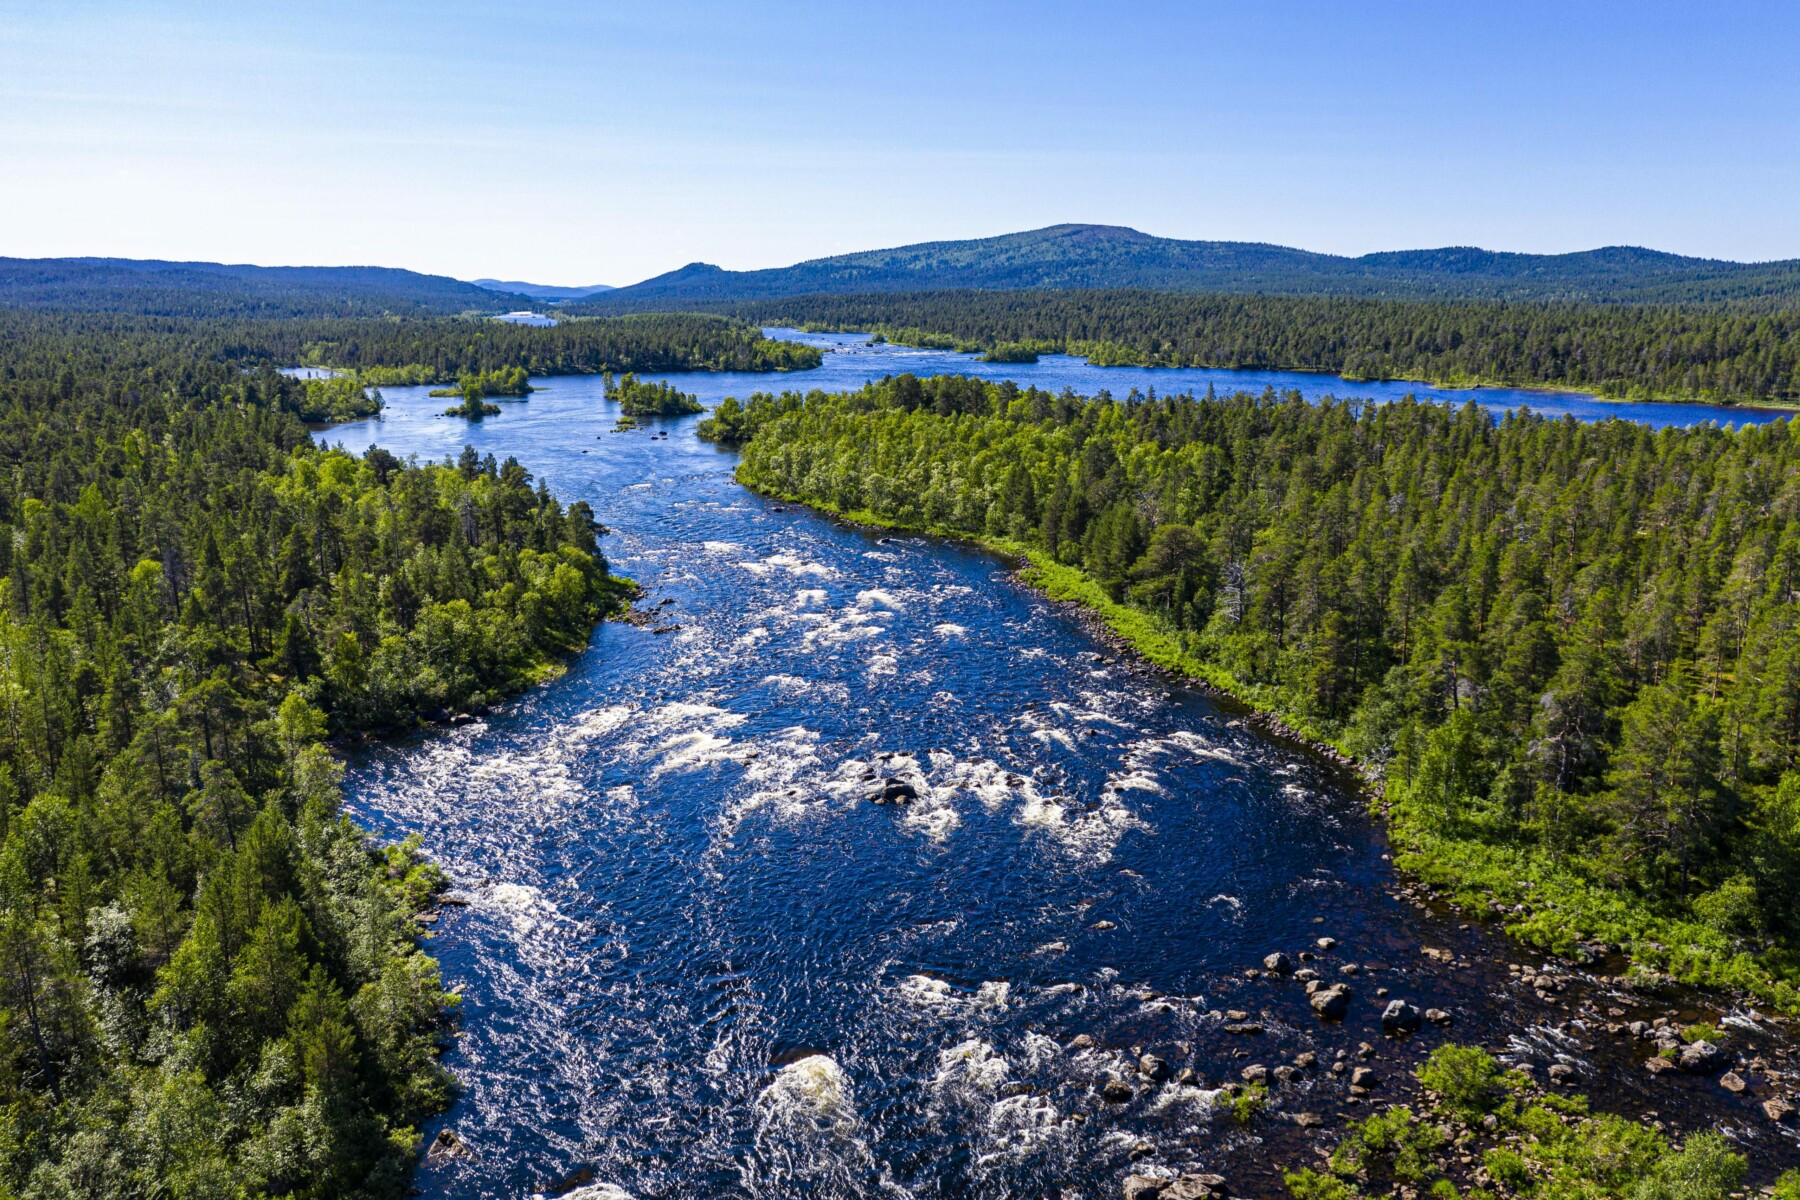 In an aerial photo, a large river flows through a forested landscape with mountains in the background.